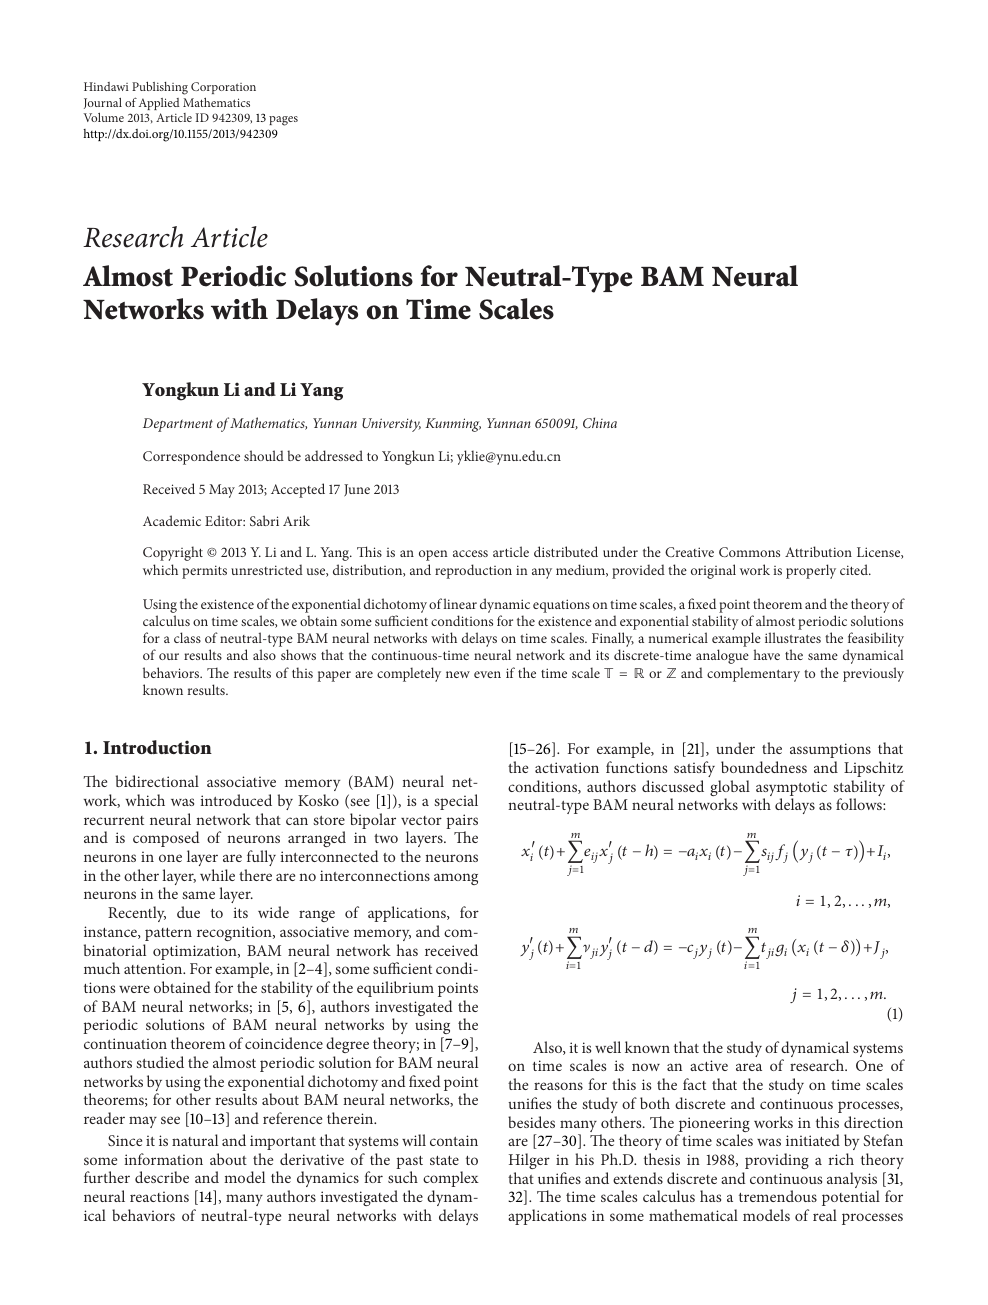 Almost Periodic Solutions For Neutral Type Bam Neural Networks With Delays On Time Scales Topic Of Research Paper In Mathematics Download Scholarly Article Pdf And Read For Free On Cyberleninka Open Science